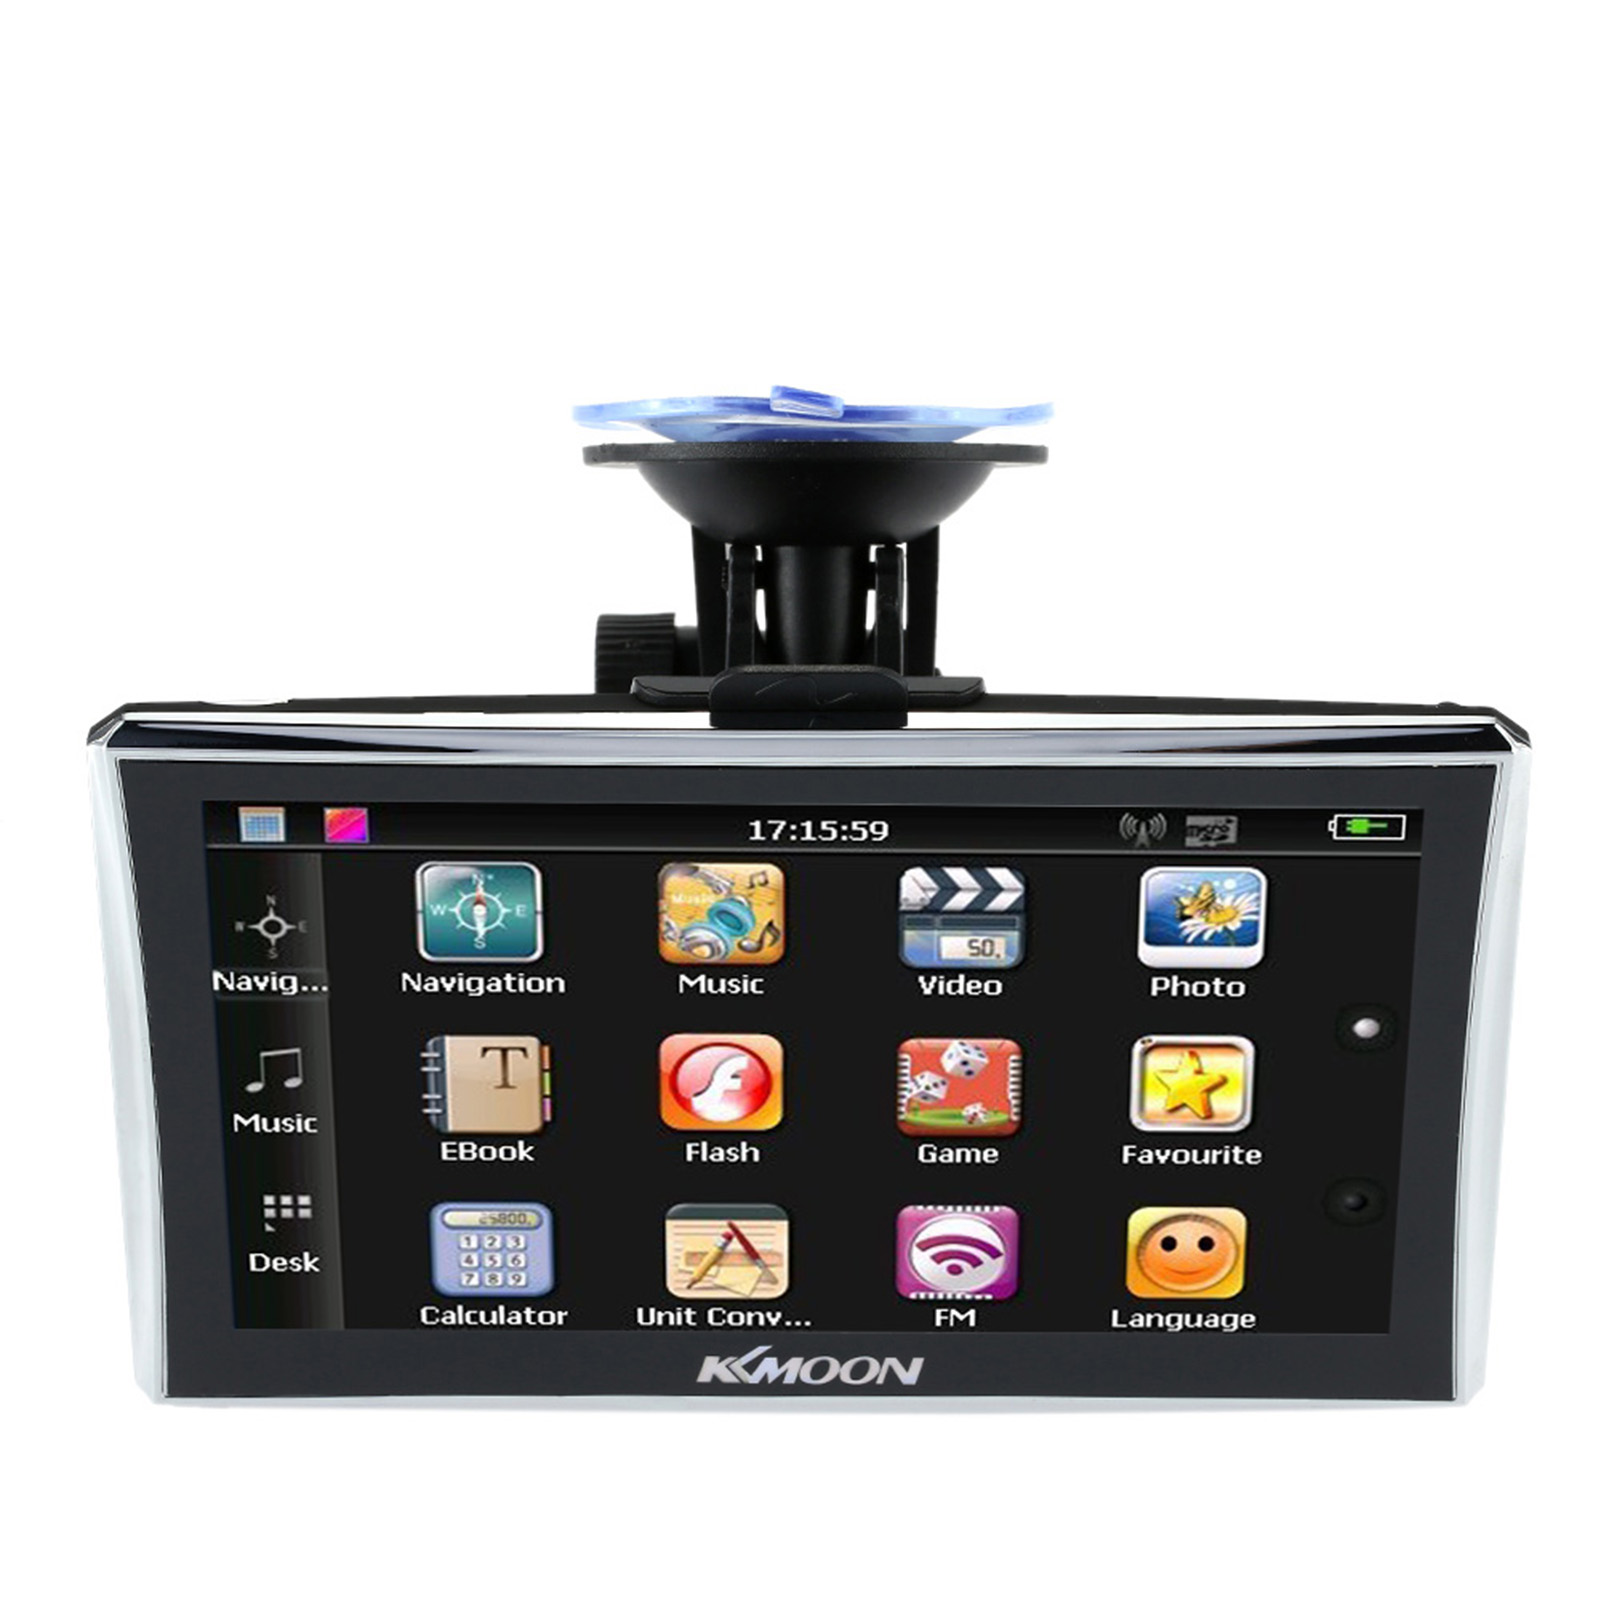 KKMOON 7'' HD Touch Screen Portable GPS Navigator 128MB RAM 4GB ROM FM MP3 Video Play Car Entertainment System with Back Support +Free Map